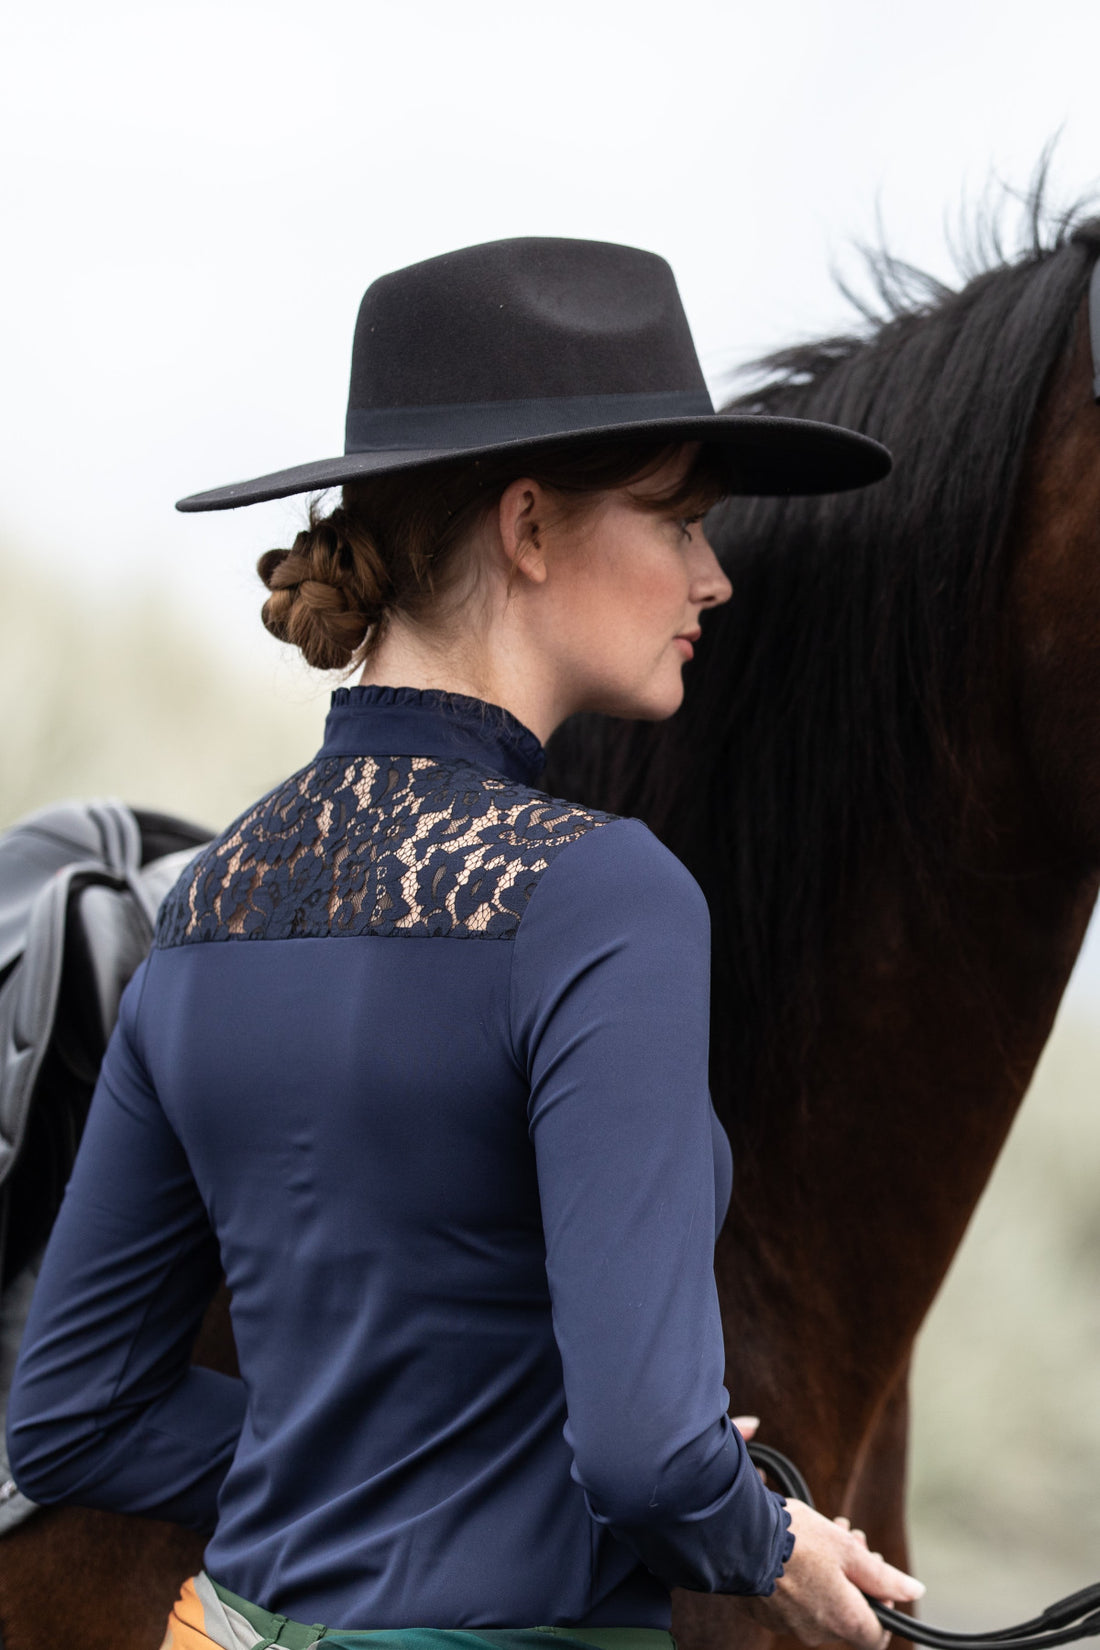 Women's Horse Riding Clothing by Saddle & Canter. Equestrian Apparel